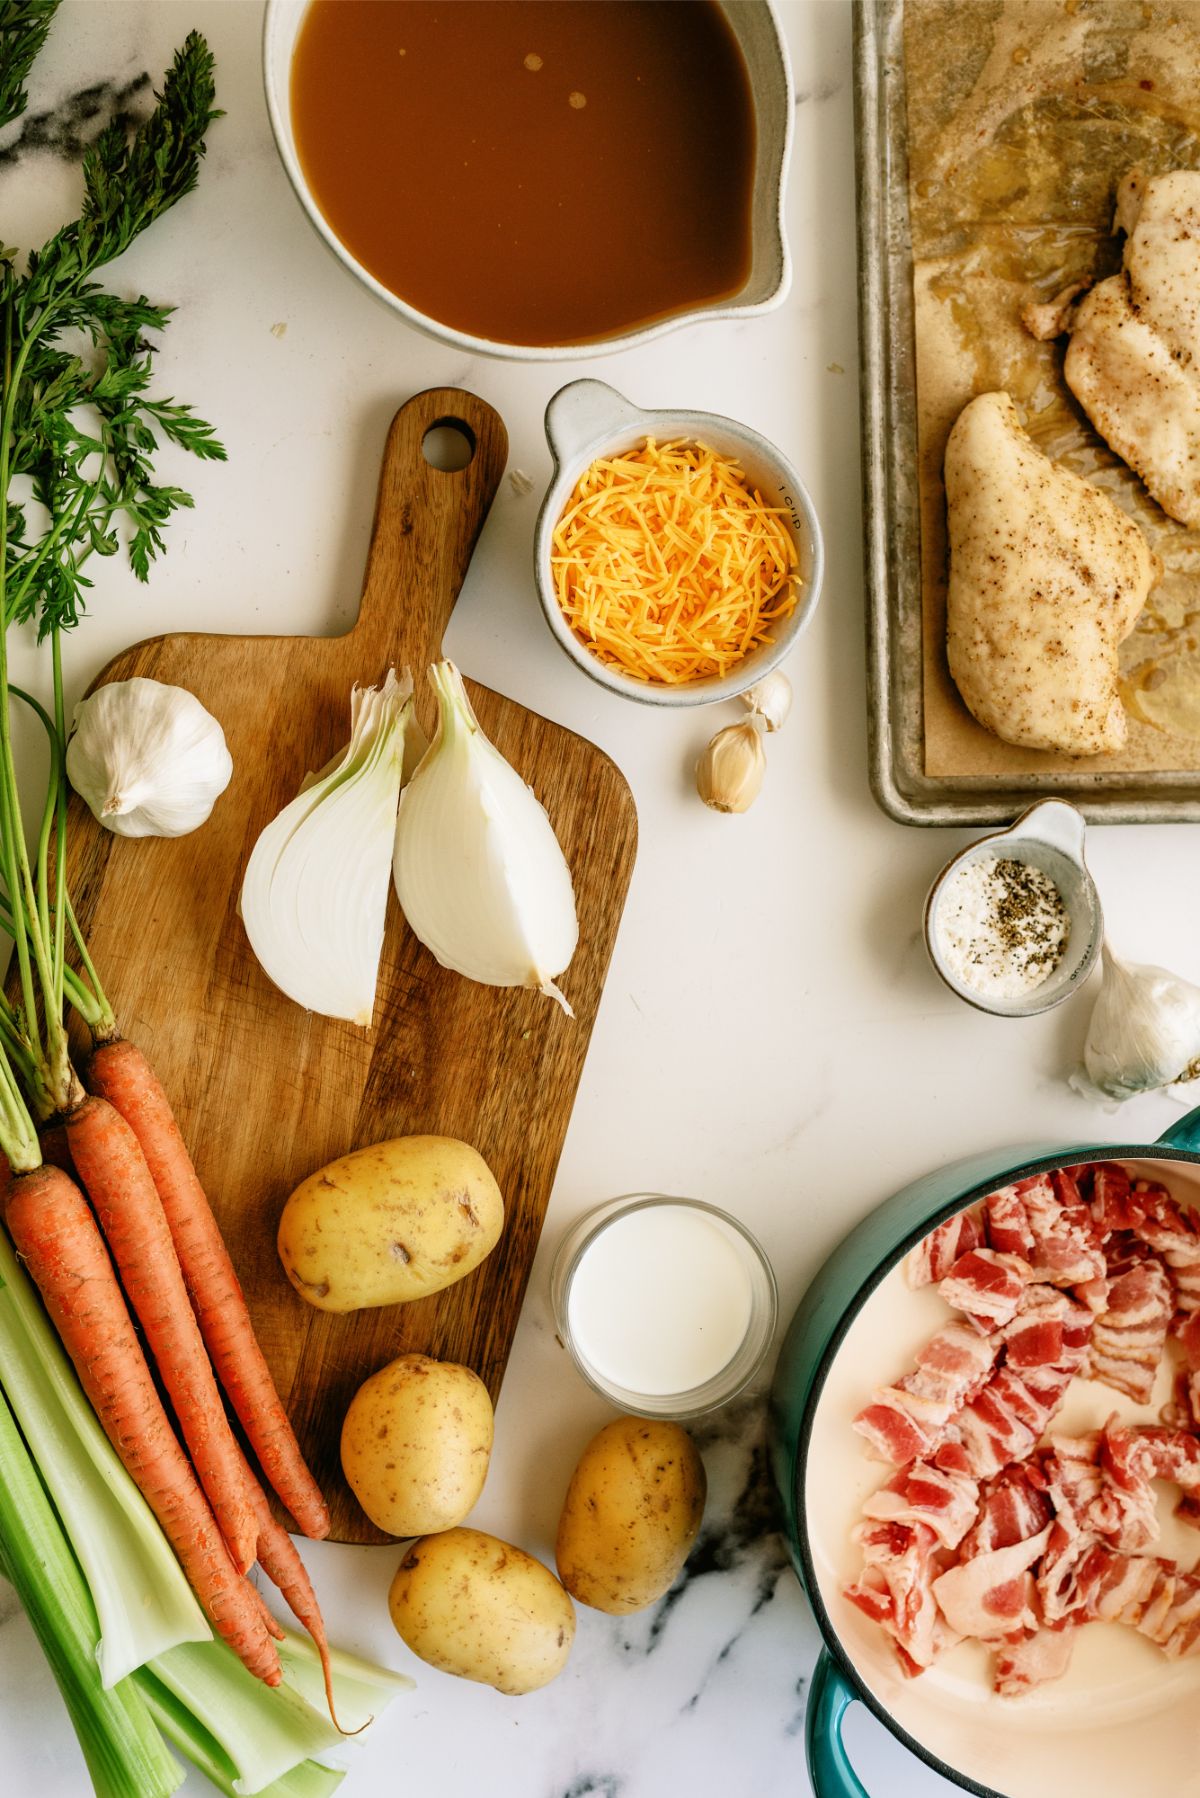 Ingredients needed to make Creamy Chicken and Potato Soup